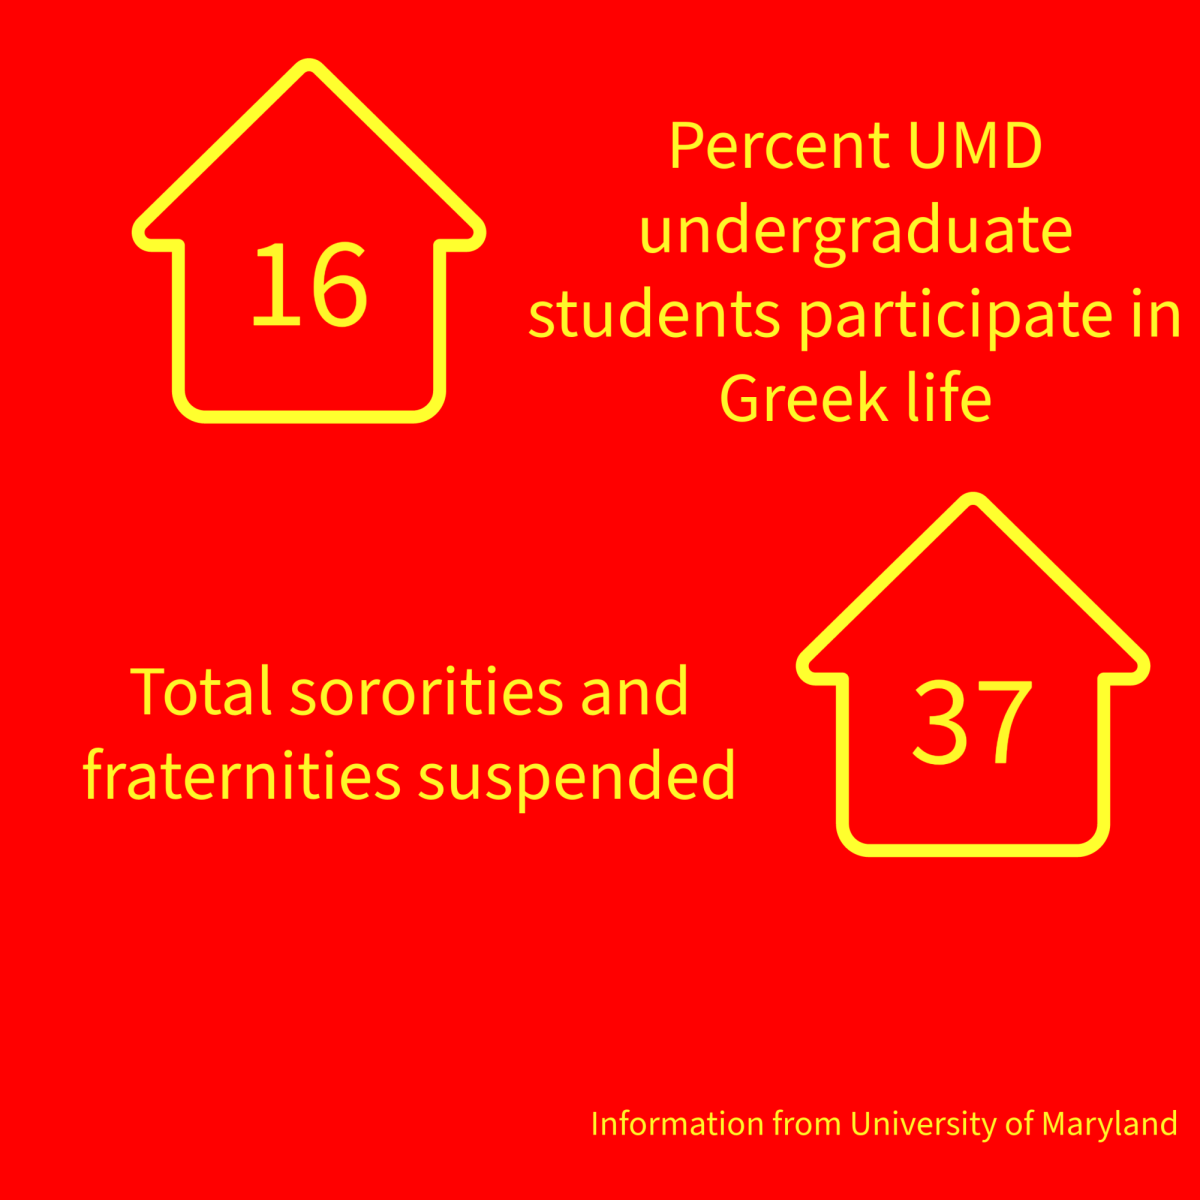 The suspension on Greek life affects a significant amount of students at UMD